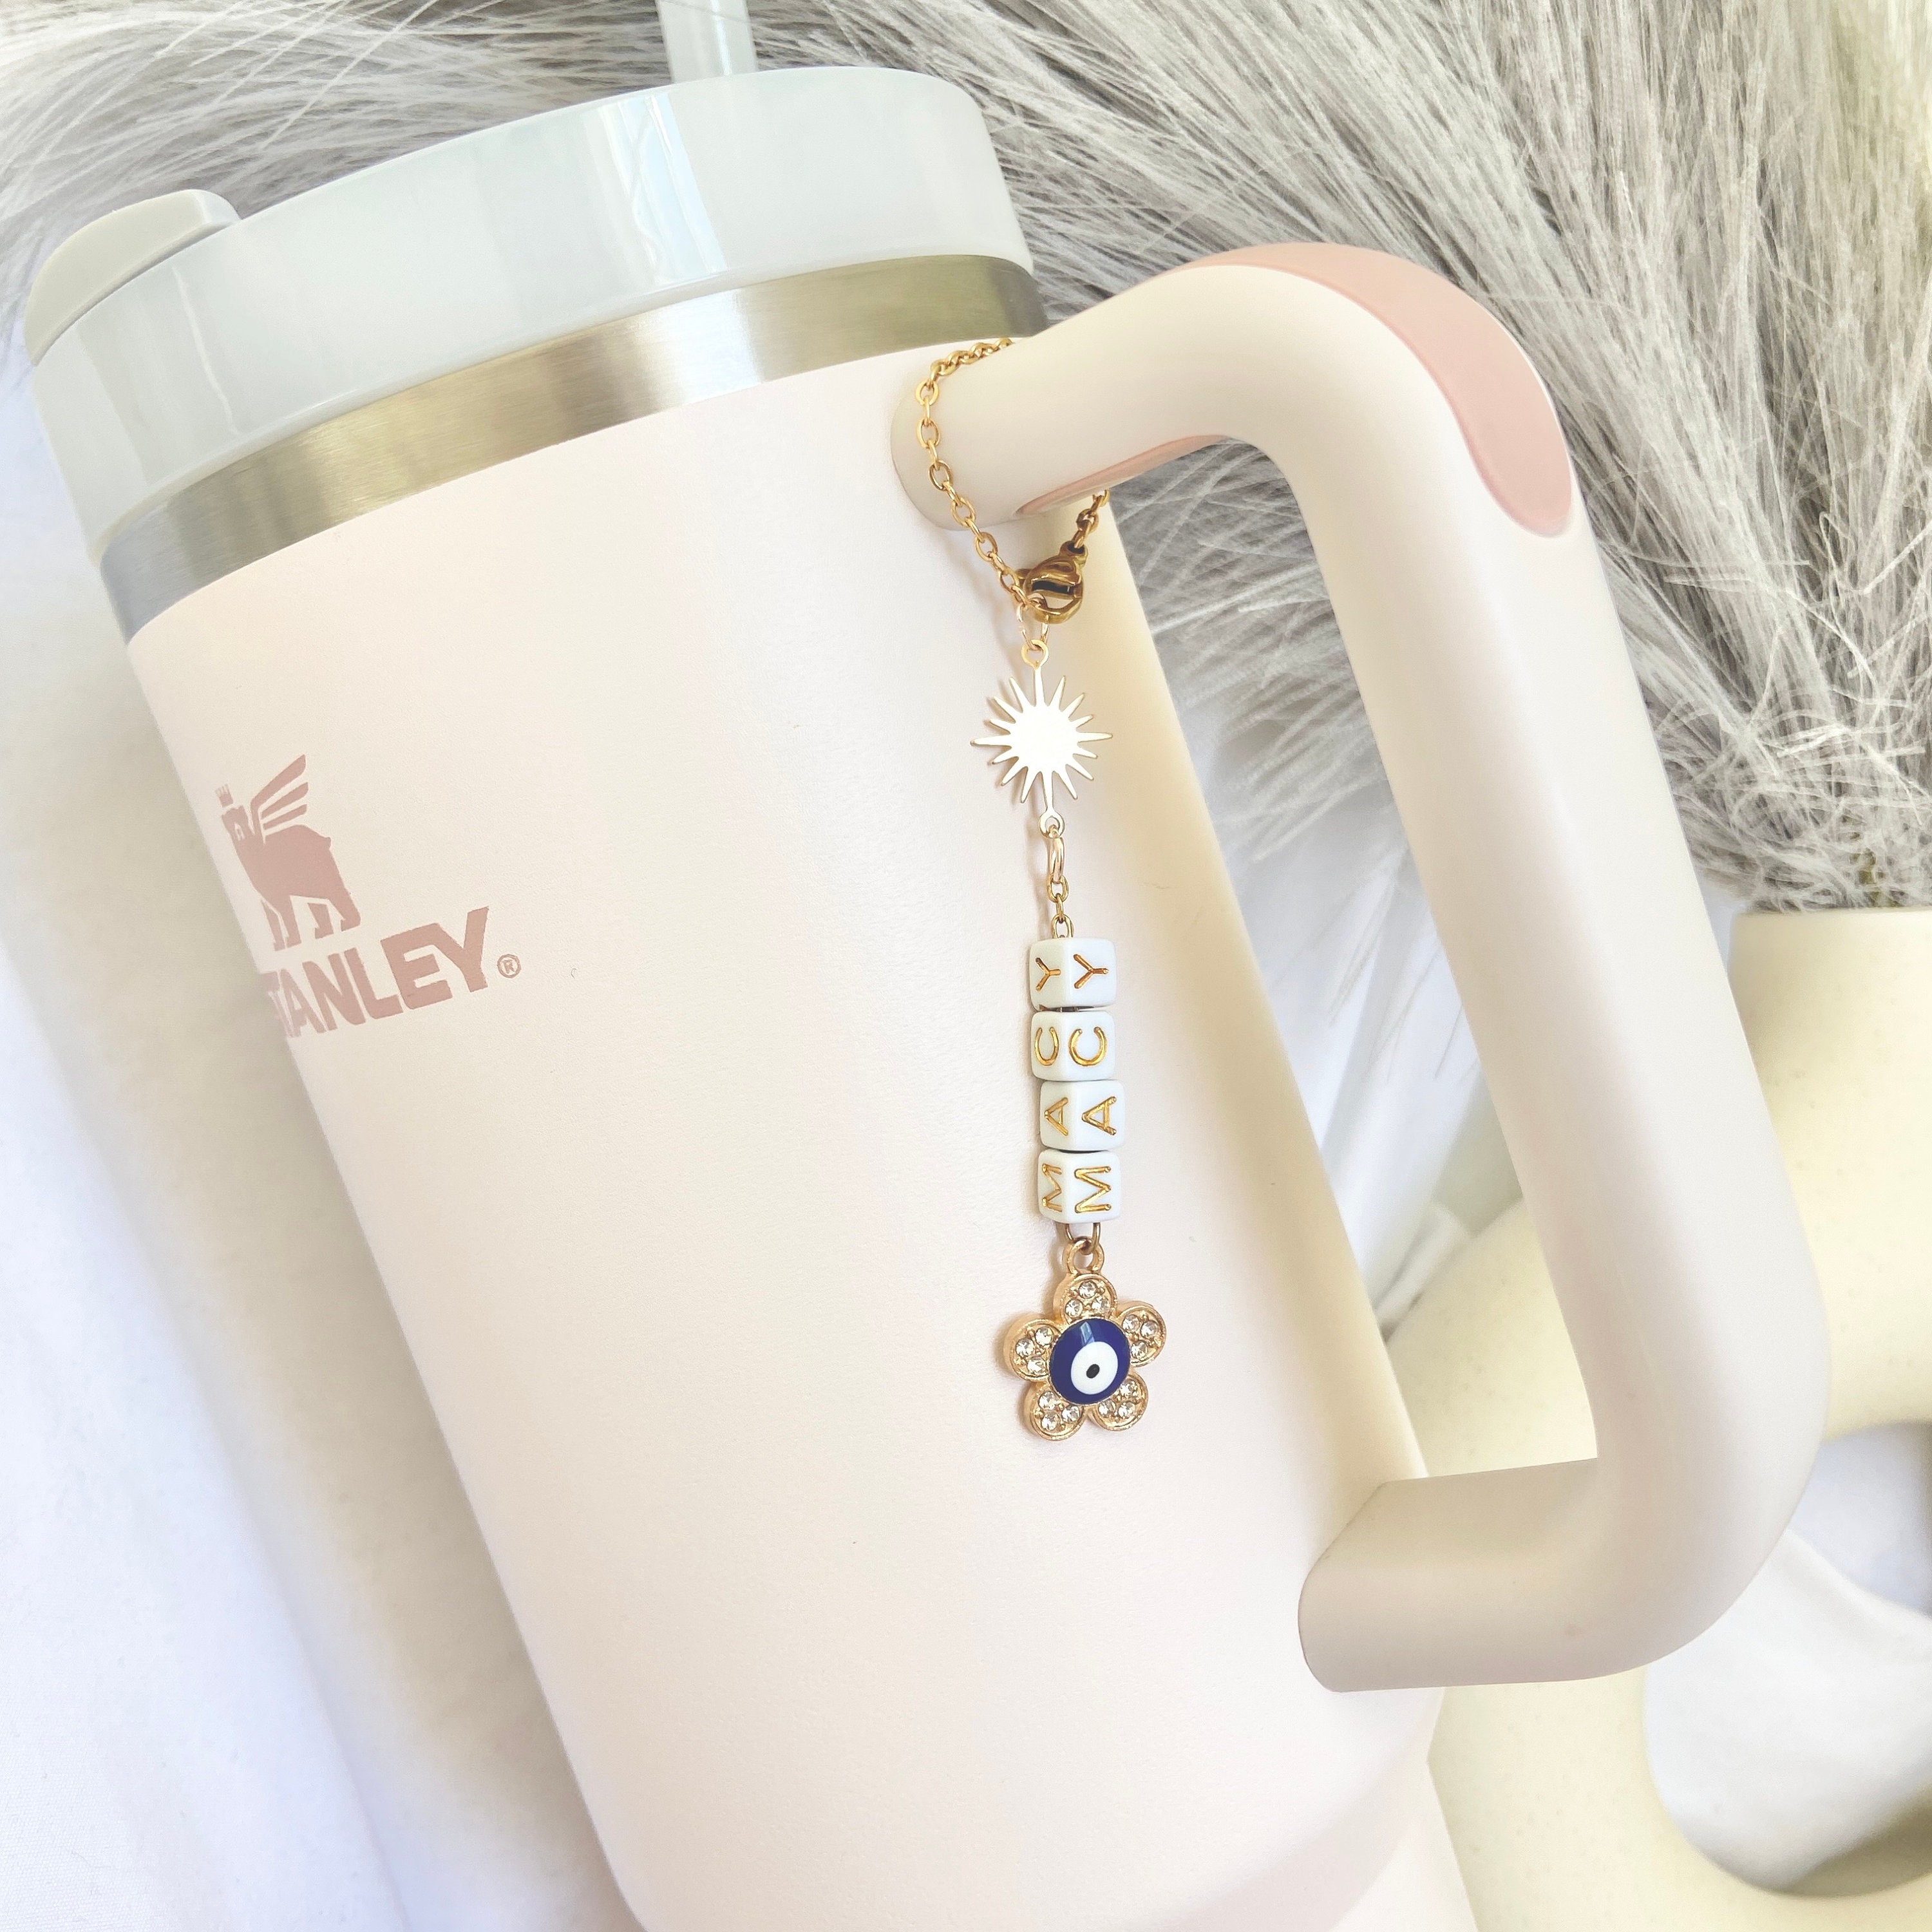 Stanley Cup Tumbler Charm Accessories for Water Bottle Stanley Cup Tumbler  Handle Charm Stanley Accessories Water Bottle Charm Accessories -   Finland